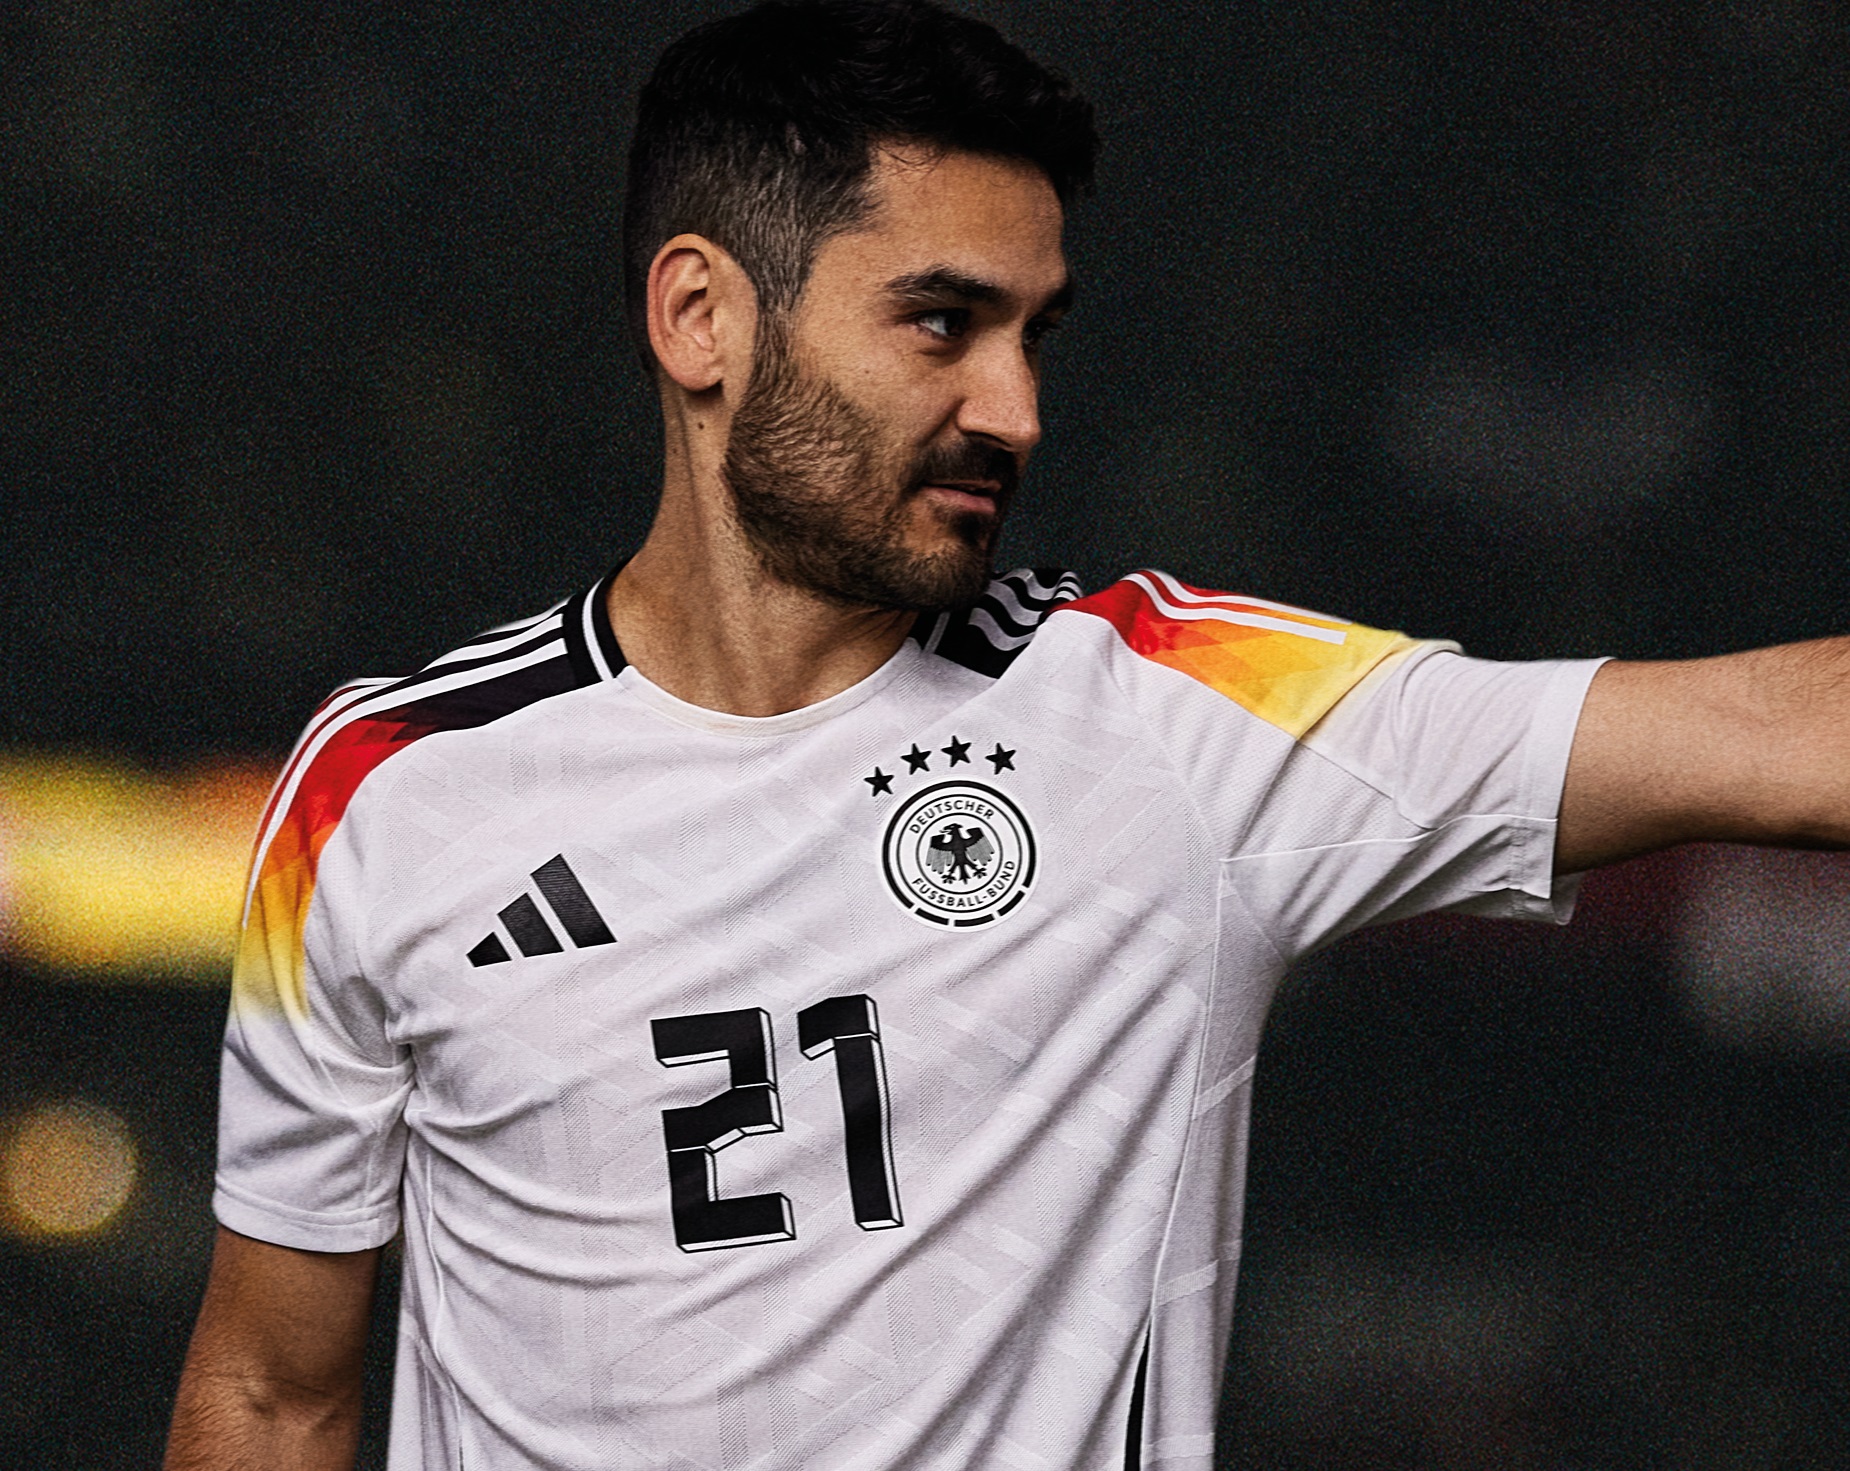 Gündogan speaks on new players, new offensive role, and Kroos' return